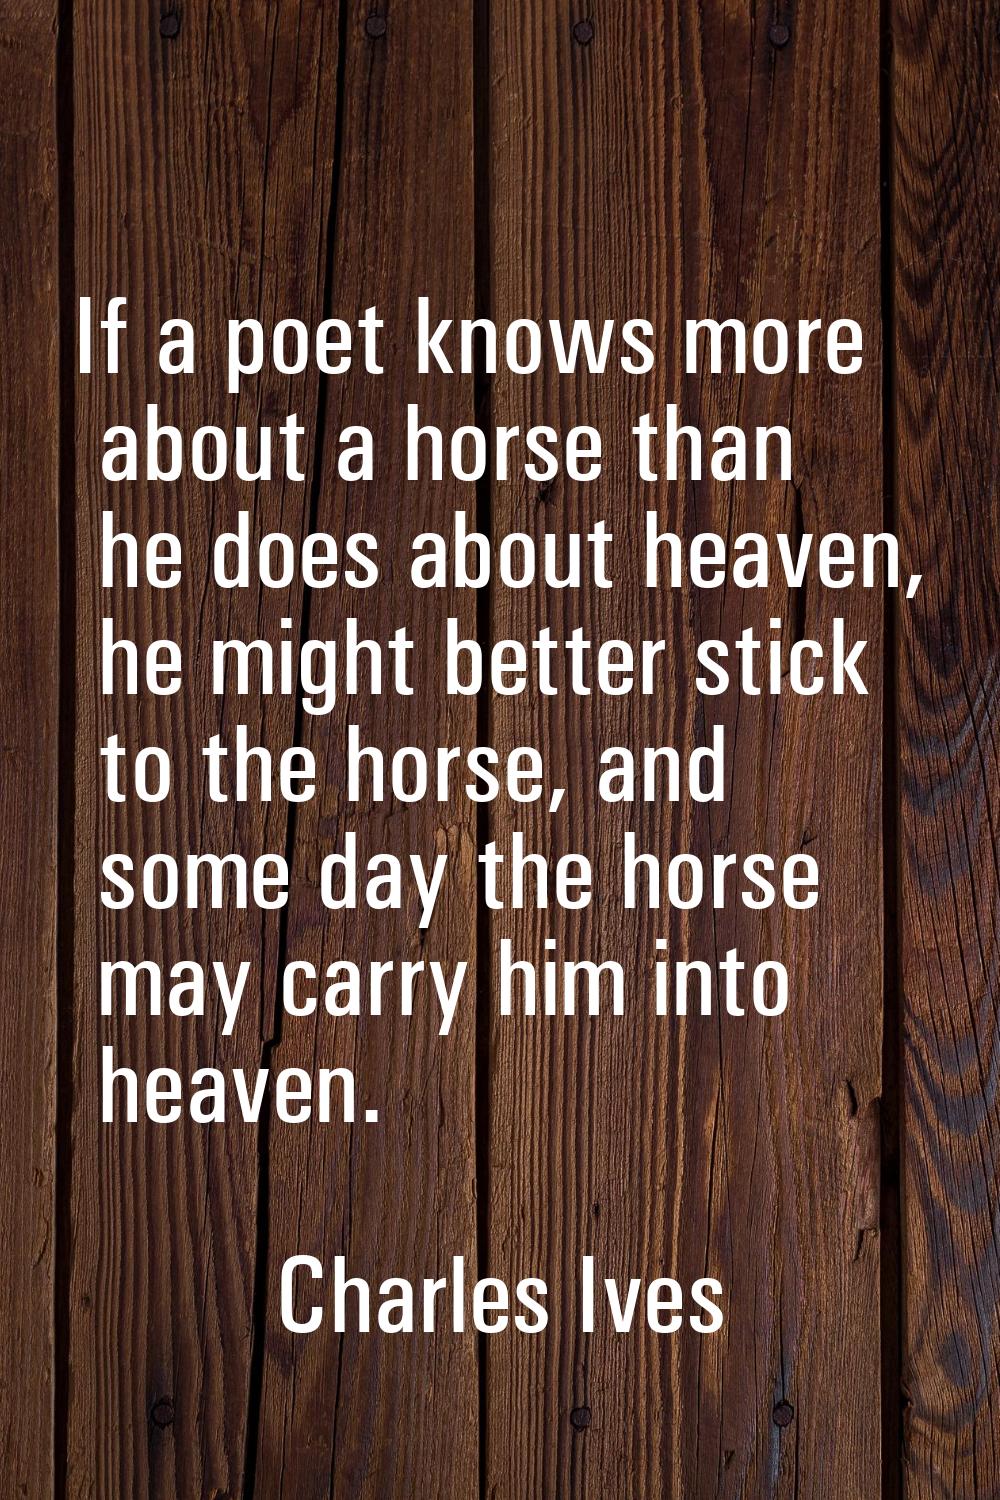 If a poet knows more about a horse than he does about heaven, he might better stick to the horse, a